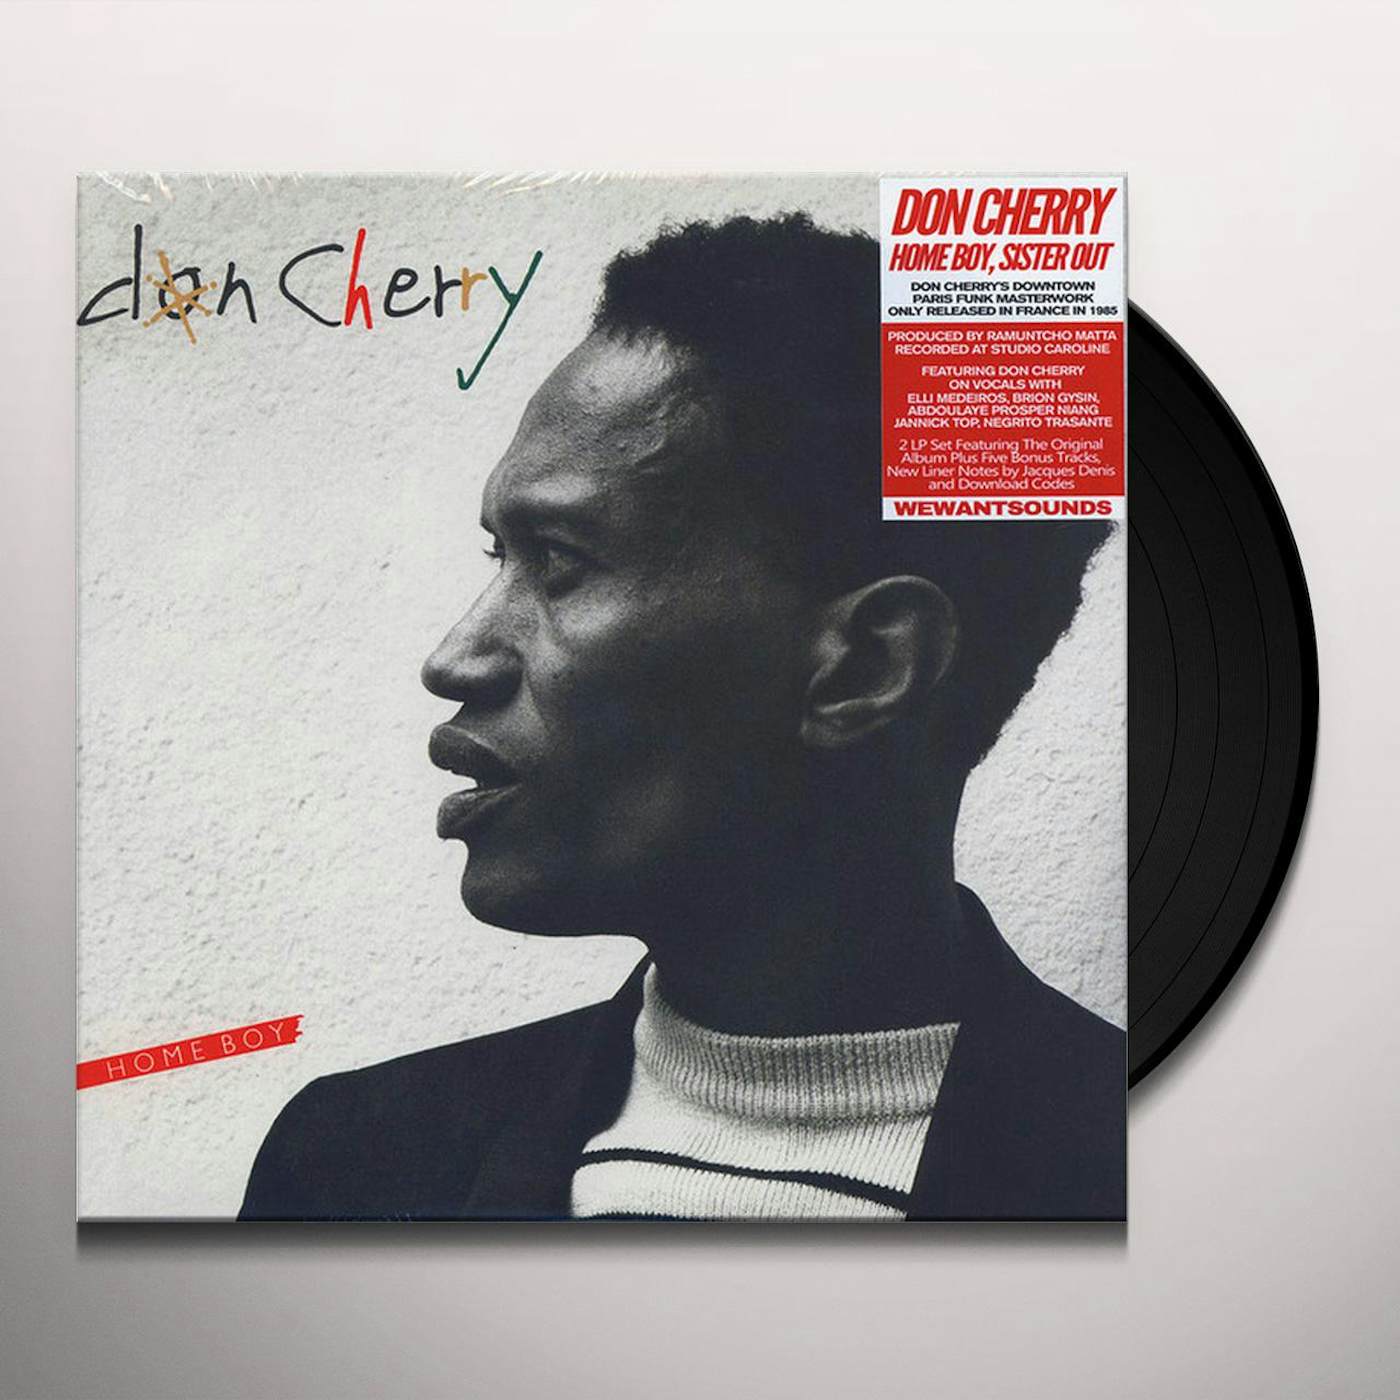 Don Cherry HOME BOY SISTER OUT Vinyl Record